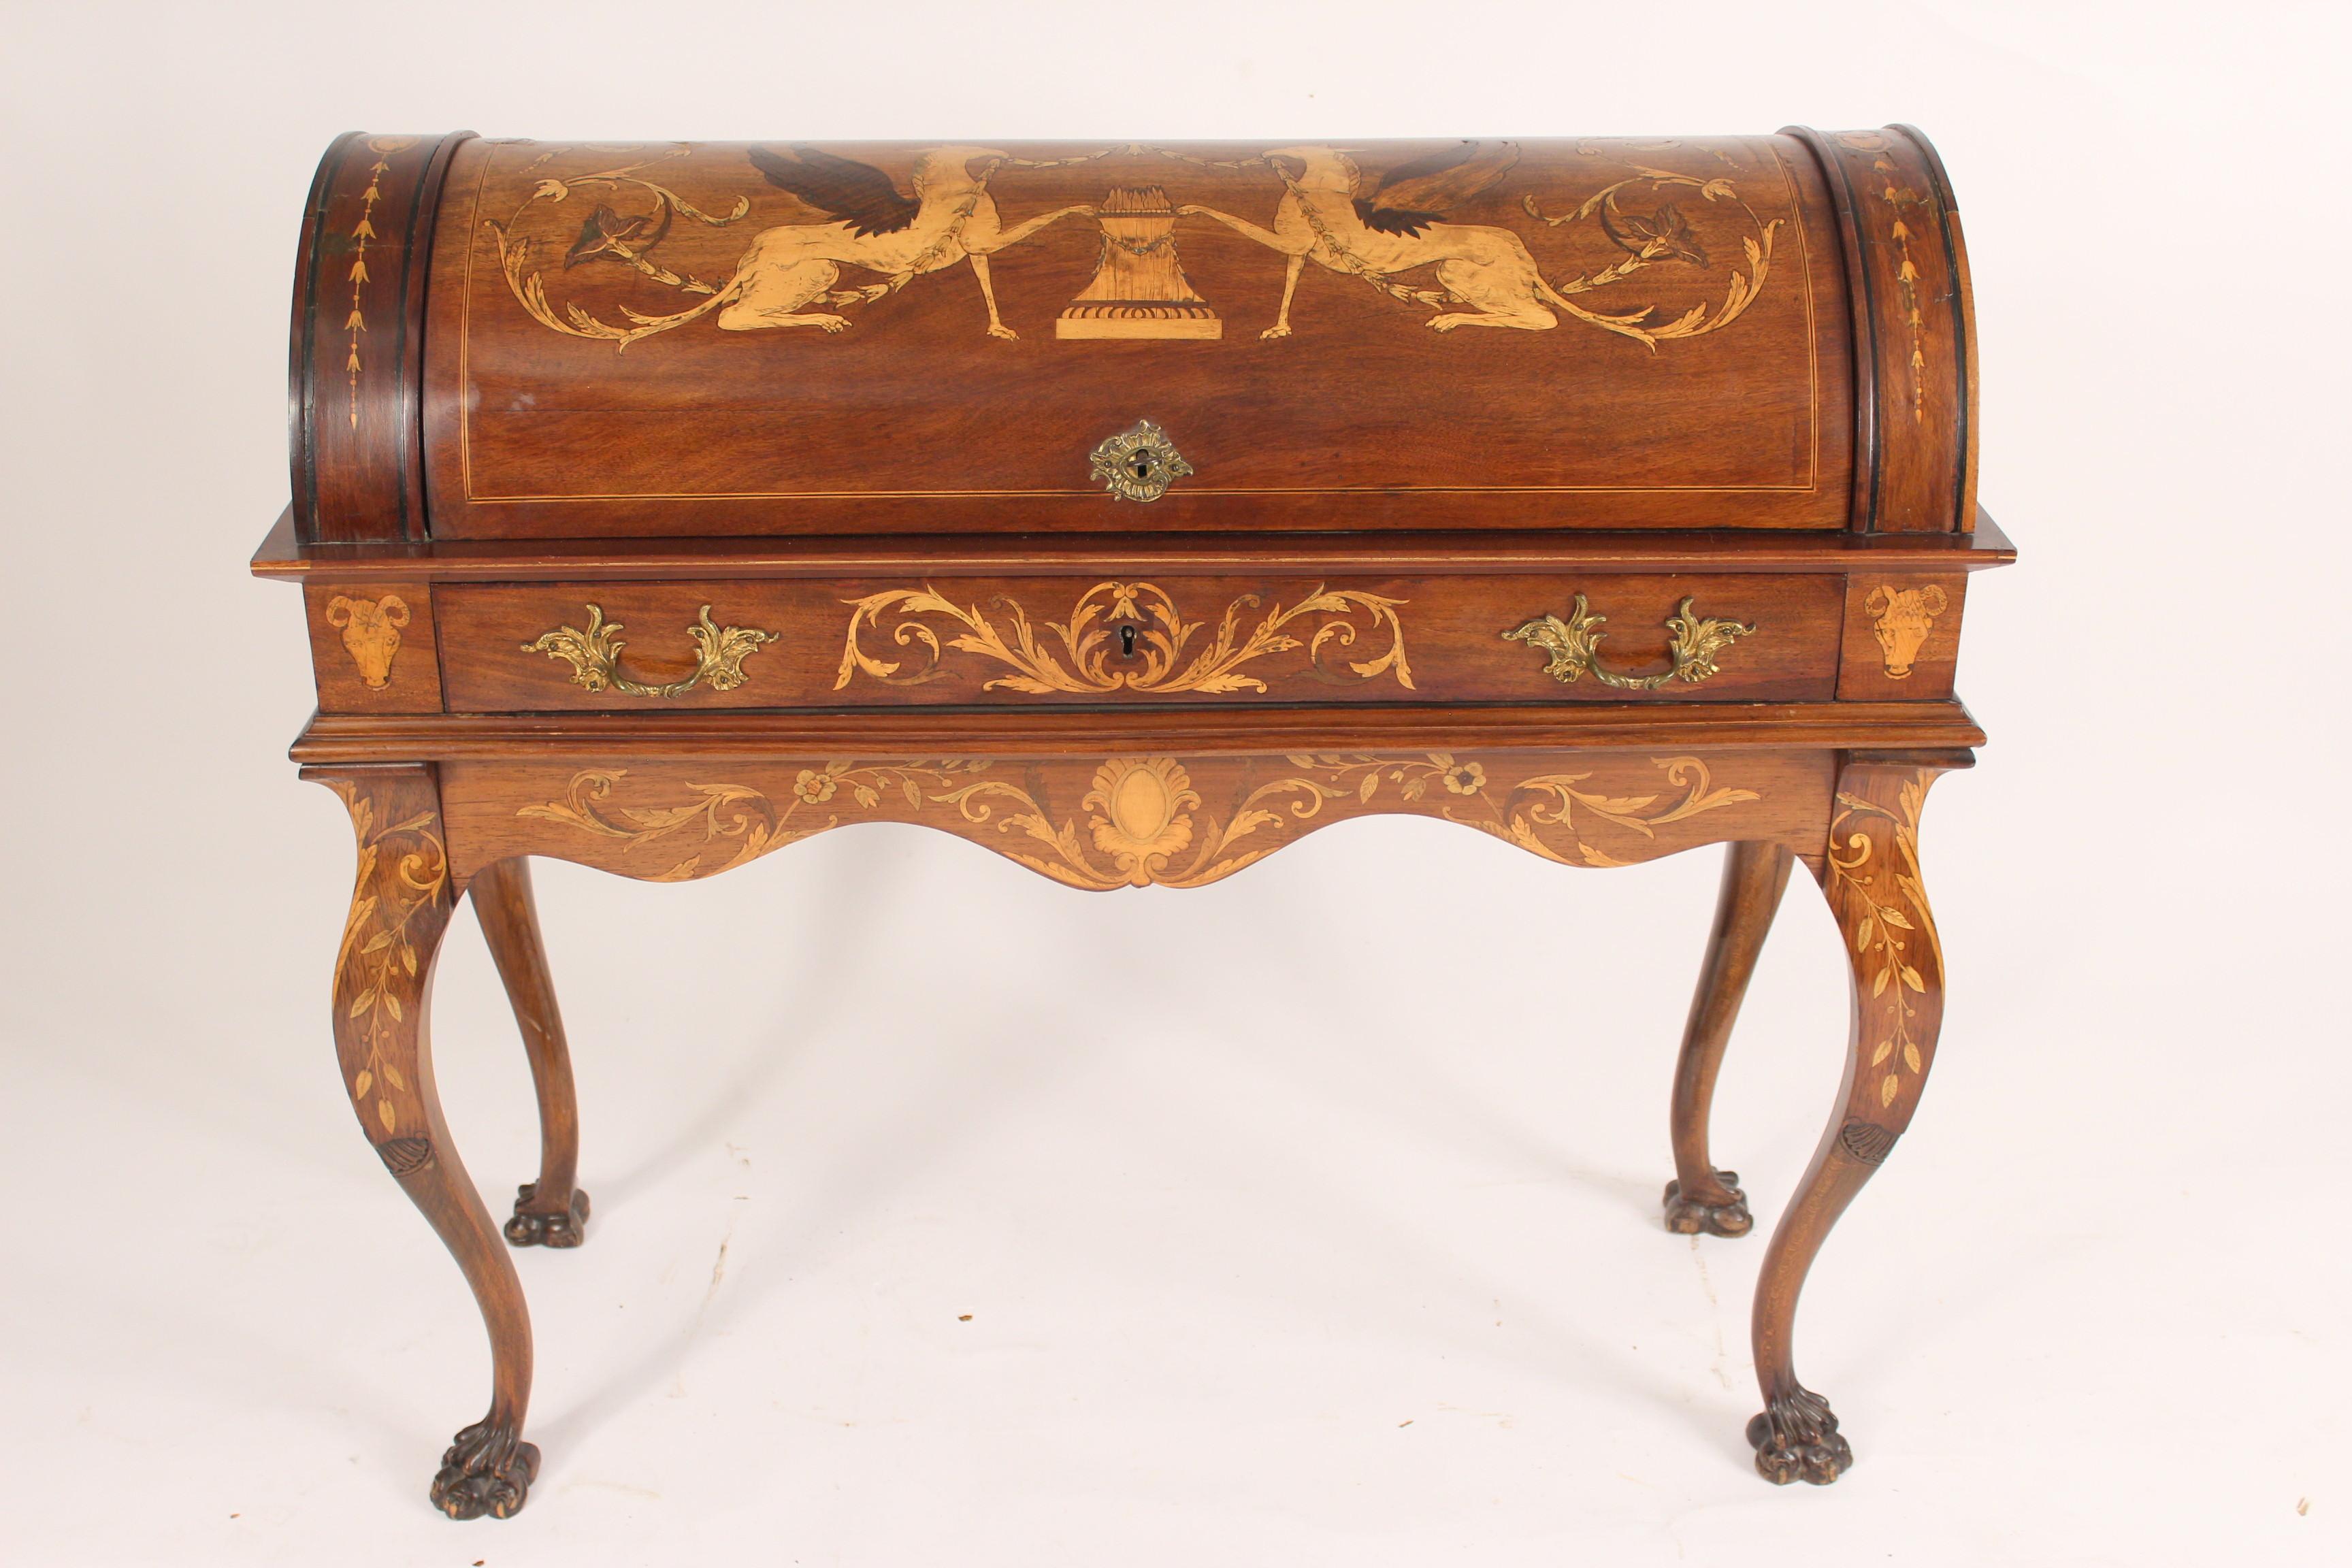 Unusual Napoleon III marquetry inlaid cylinder desk, circa late 19th century. The cylinder top is inlaid with griffins, bell flowers and scrolling vines. With a tooled leather writing surface. The cabriole legs end in paw feet. Fine quality brass